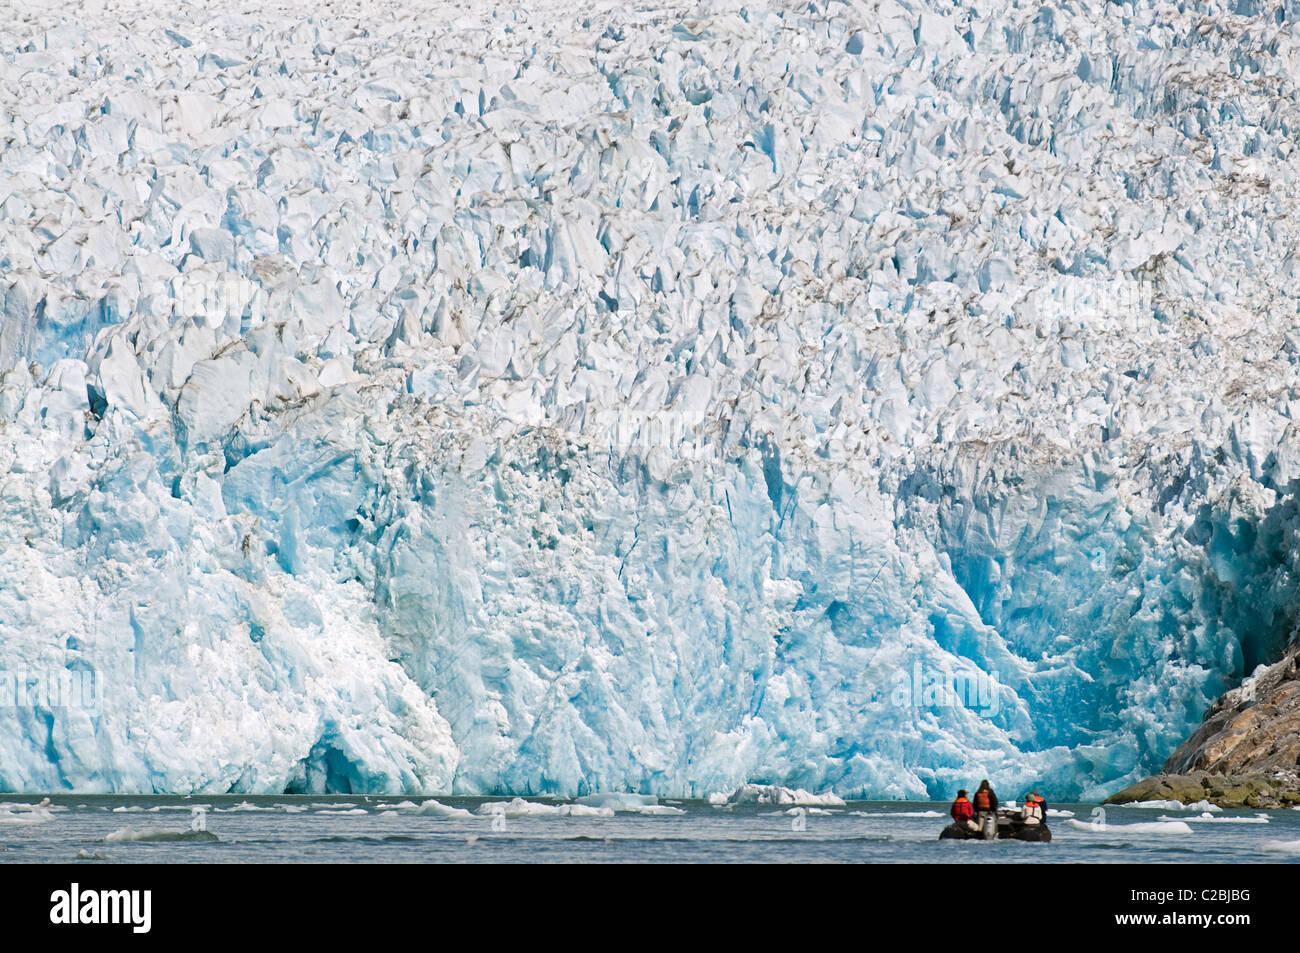 Ecotourists in a zodiac in front of Dawes Glacier. Stock Photo